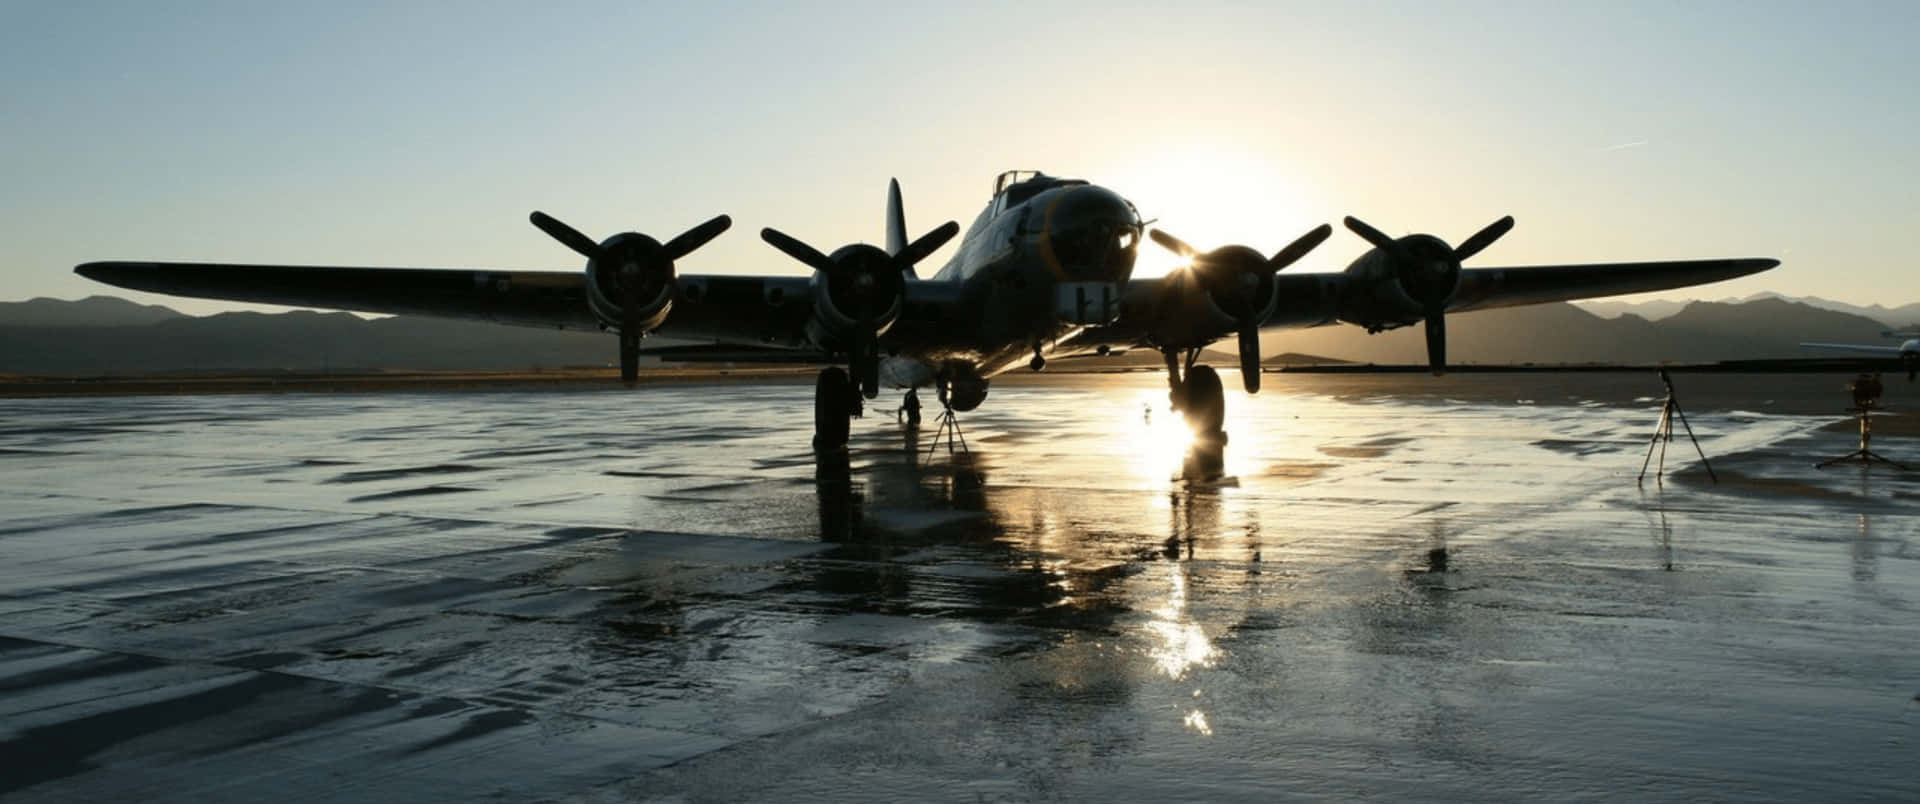 3440x1440p Parked Military Plane Background